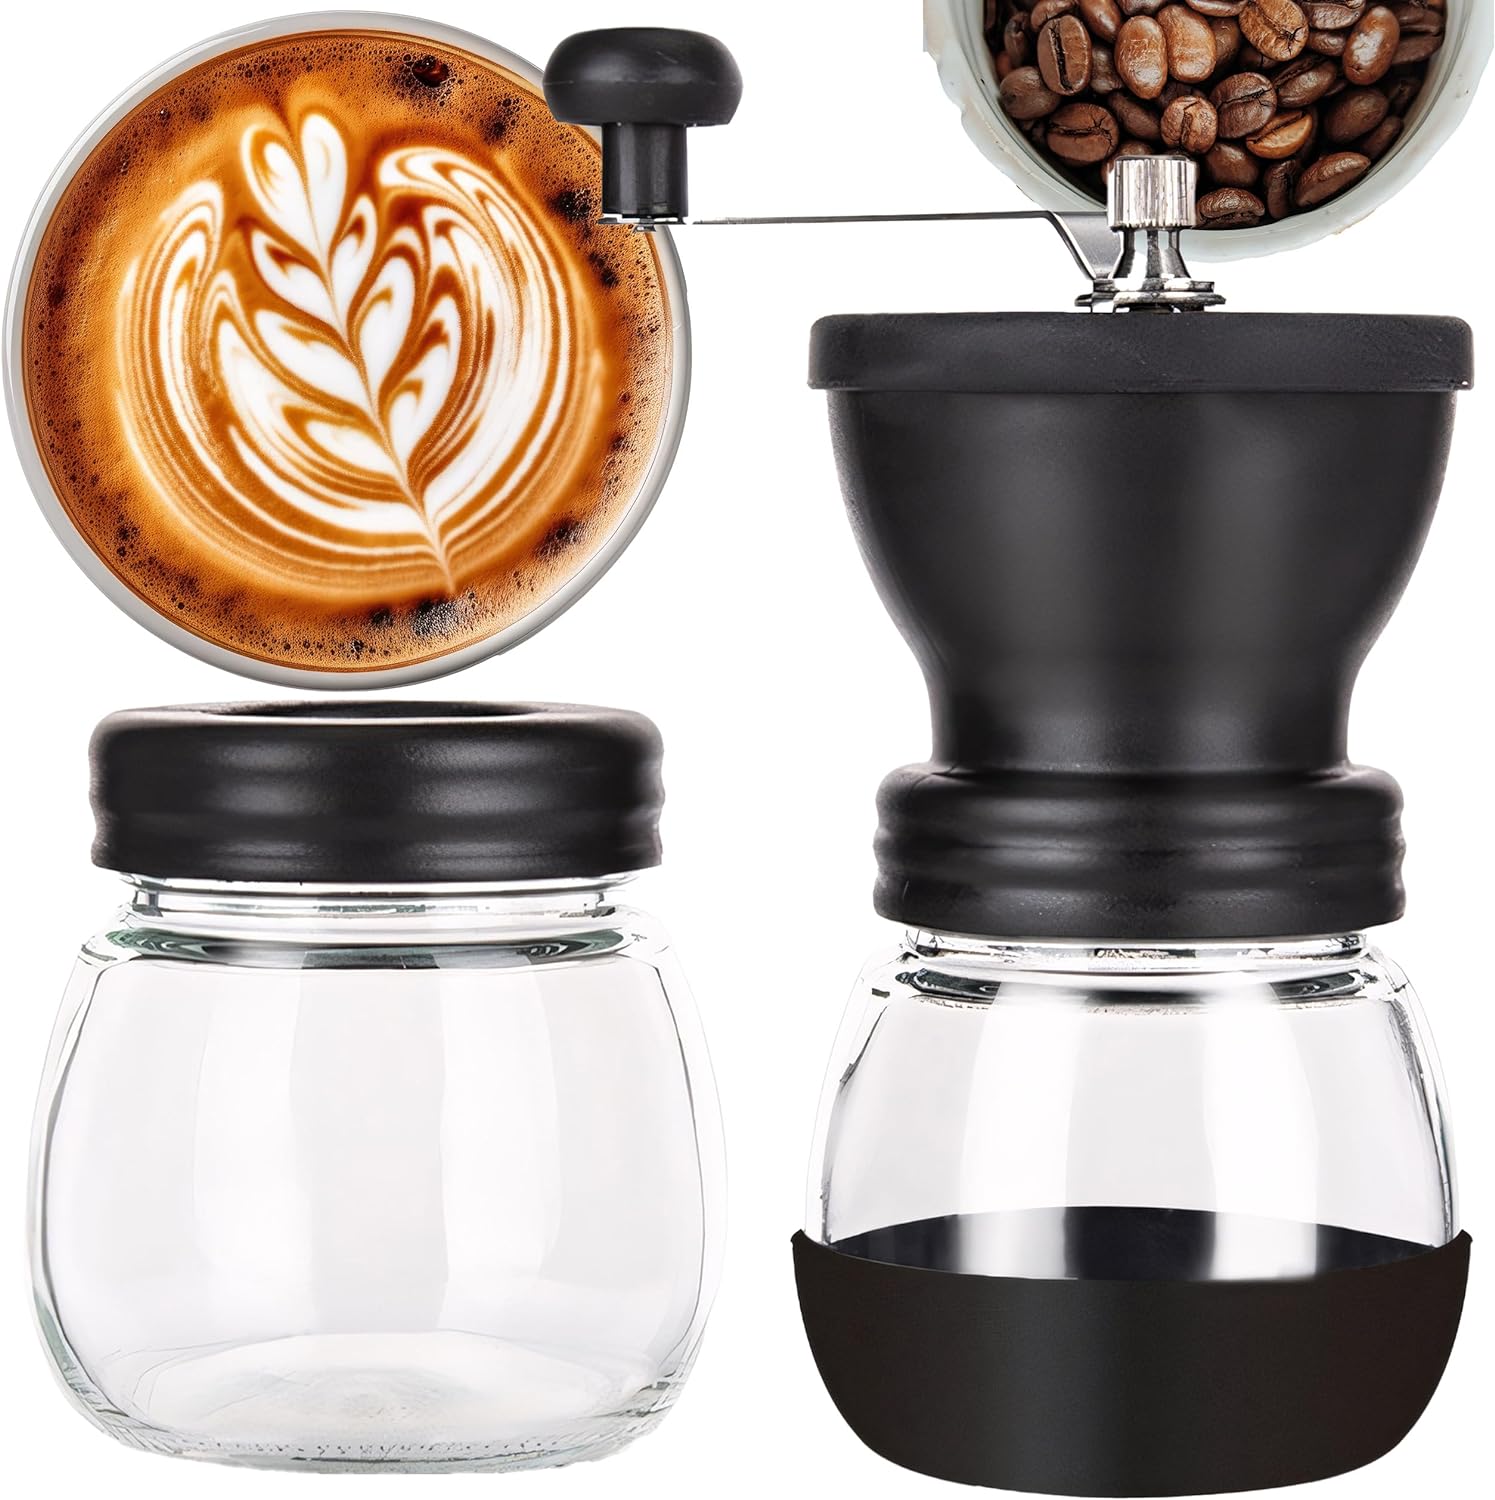 Retoo Coffee Grinder and Pepper Mill Stainless Steel Blade Bowl, Quiet Coffee Grinder with for Coarse and Fine Mill, Black